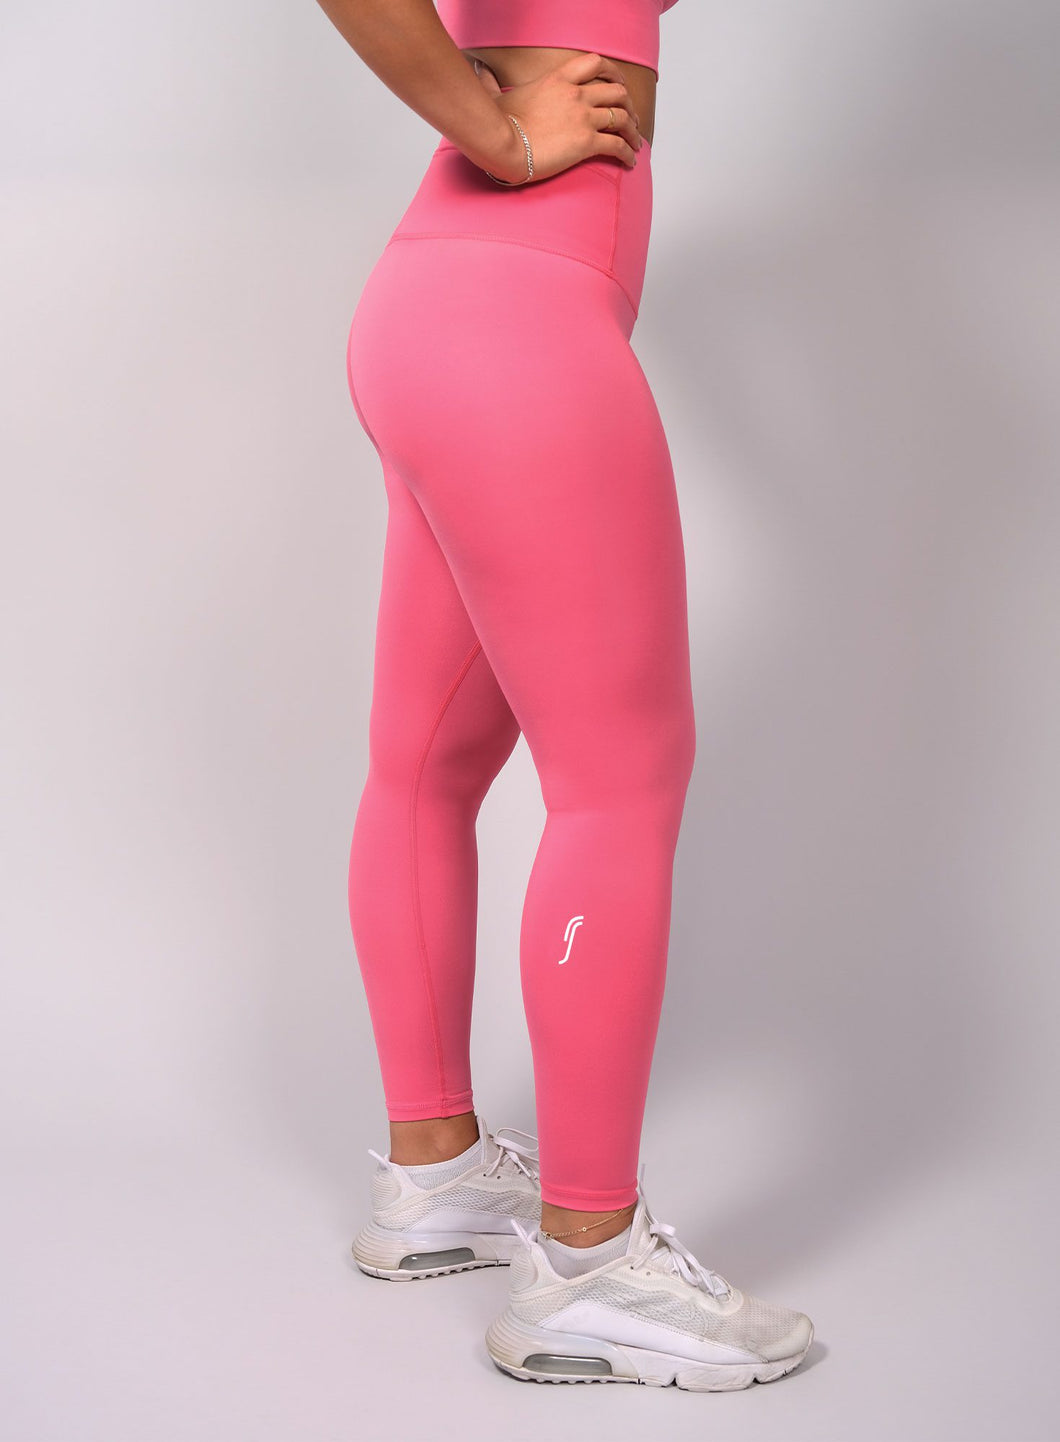 RS Women's Ball Pocket Tights- Hot Pink